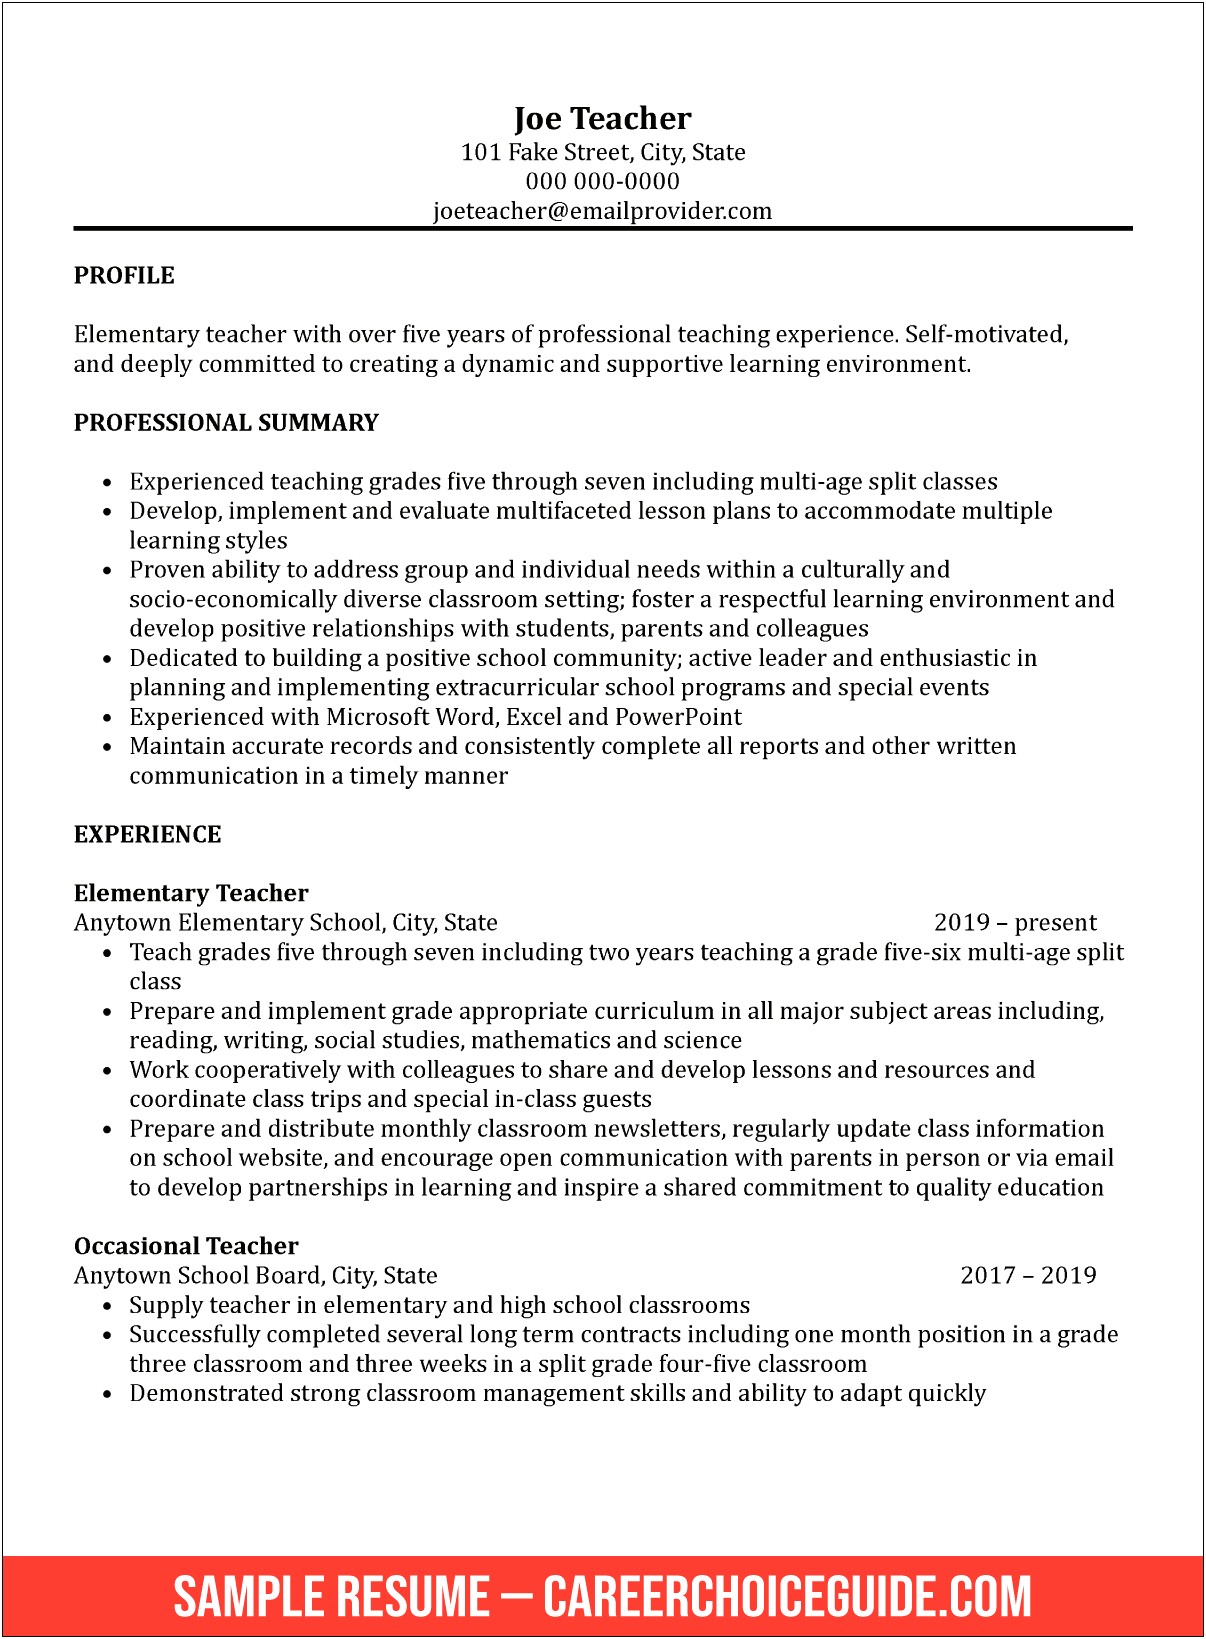 Sample Resume Of A Teacher Without Teaching Experience